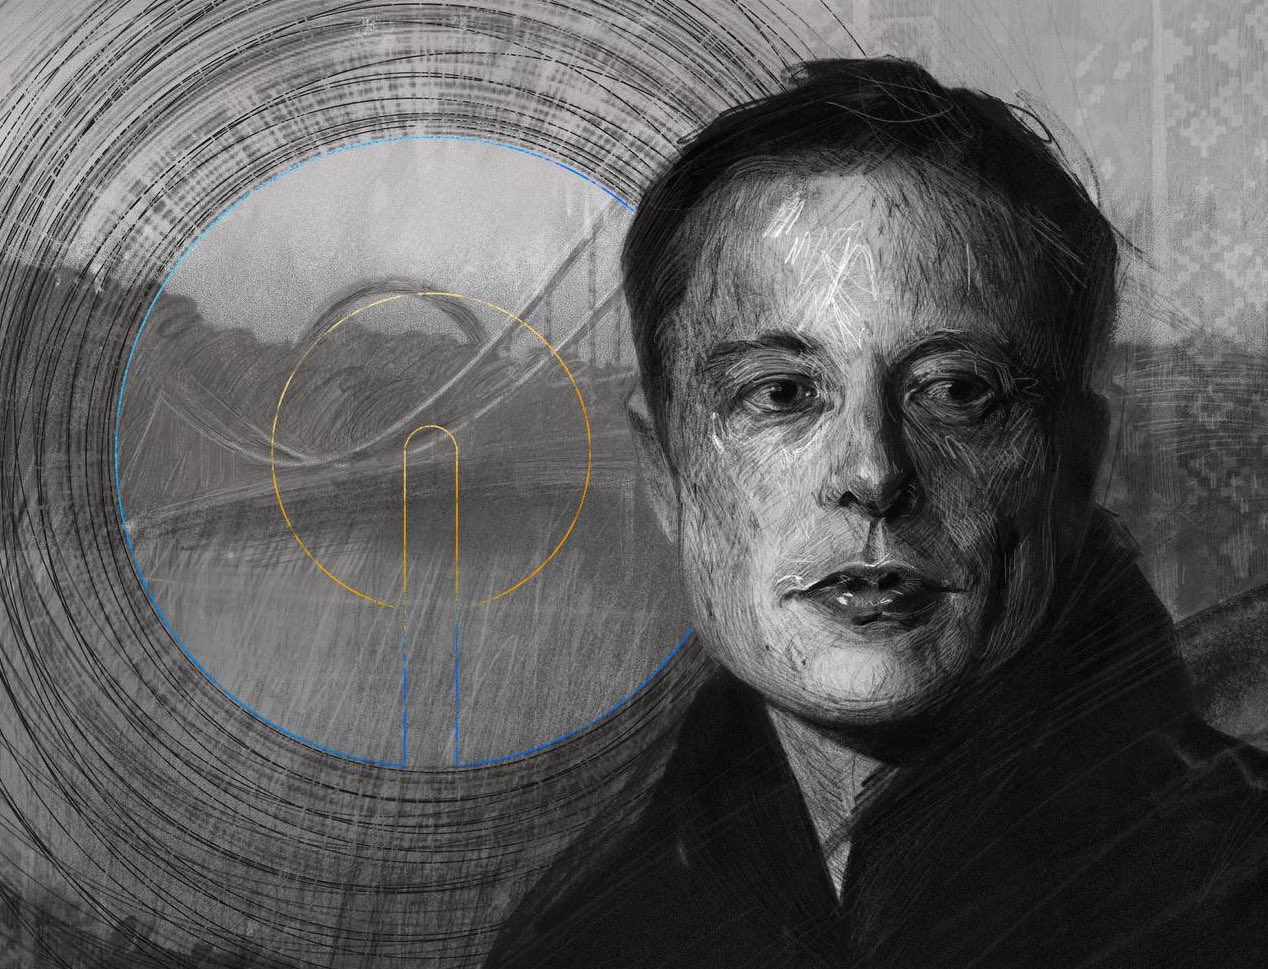 Elon Musk NFT created to commemorate his aide to Ukraine during war